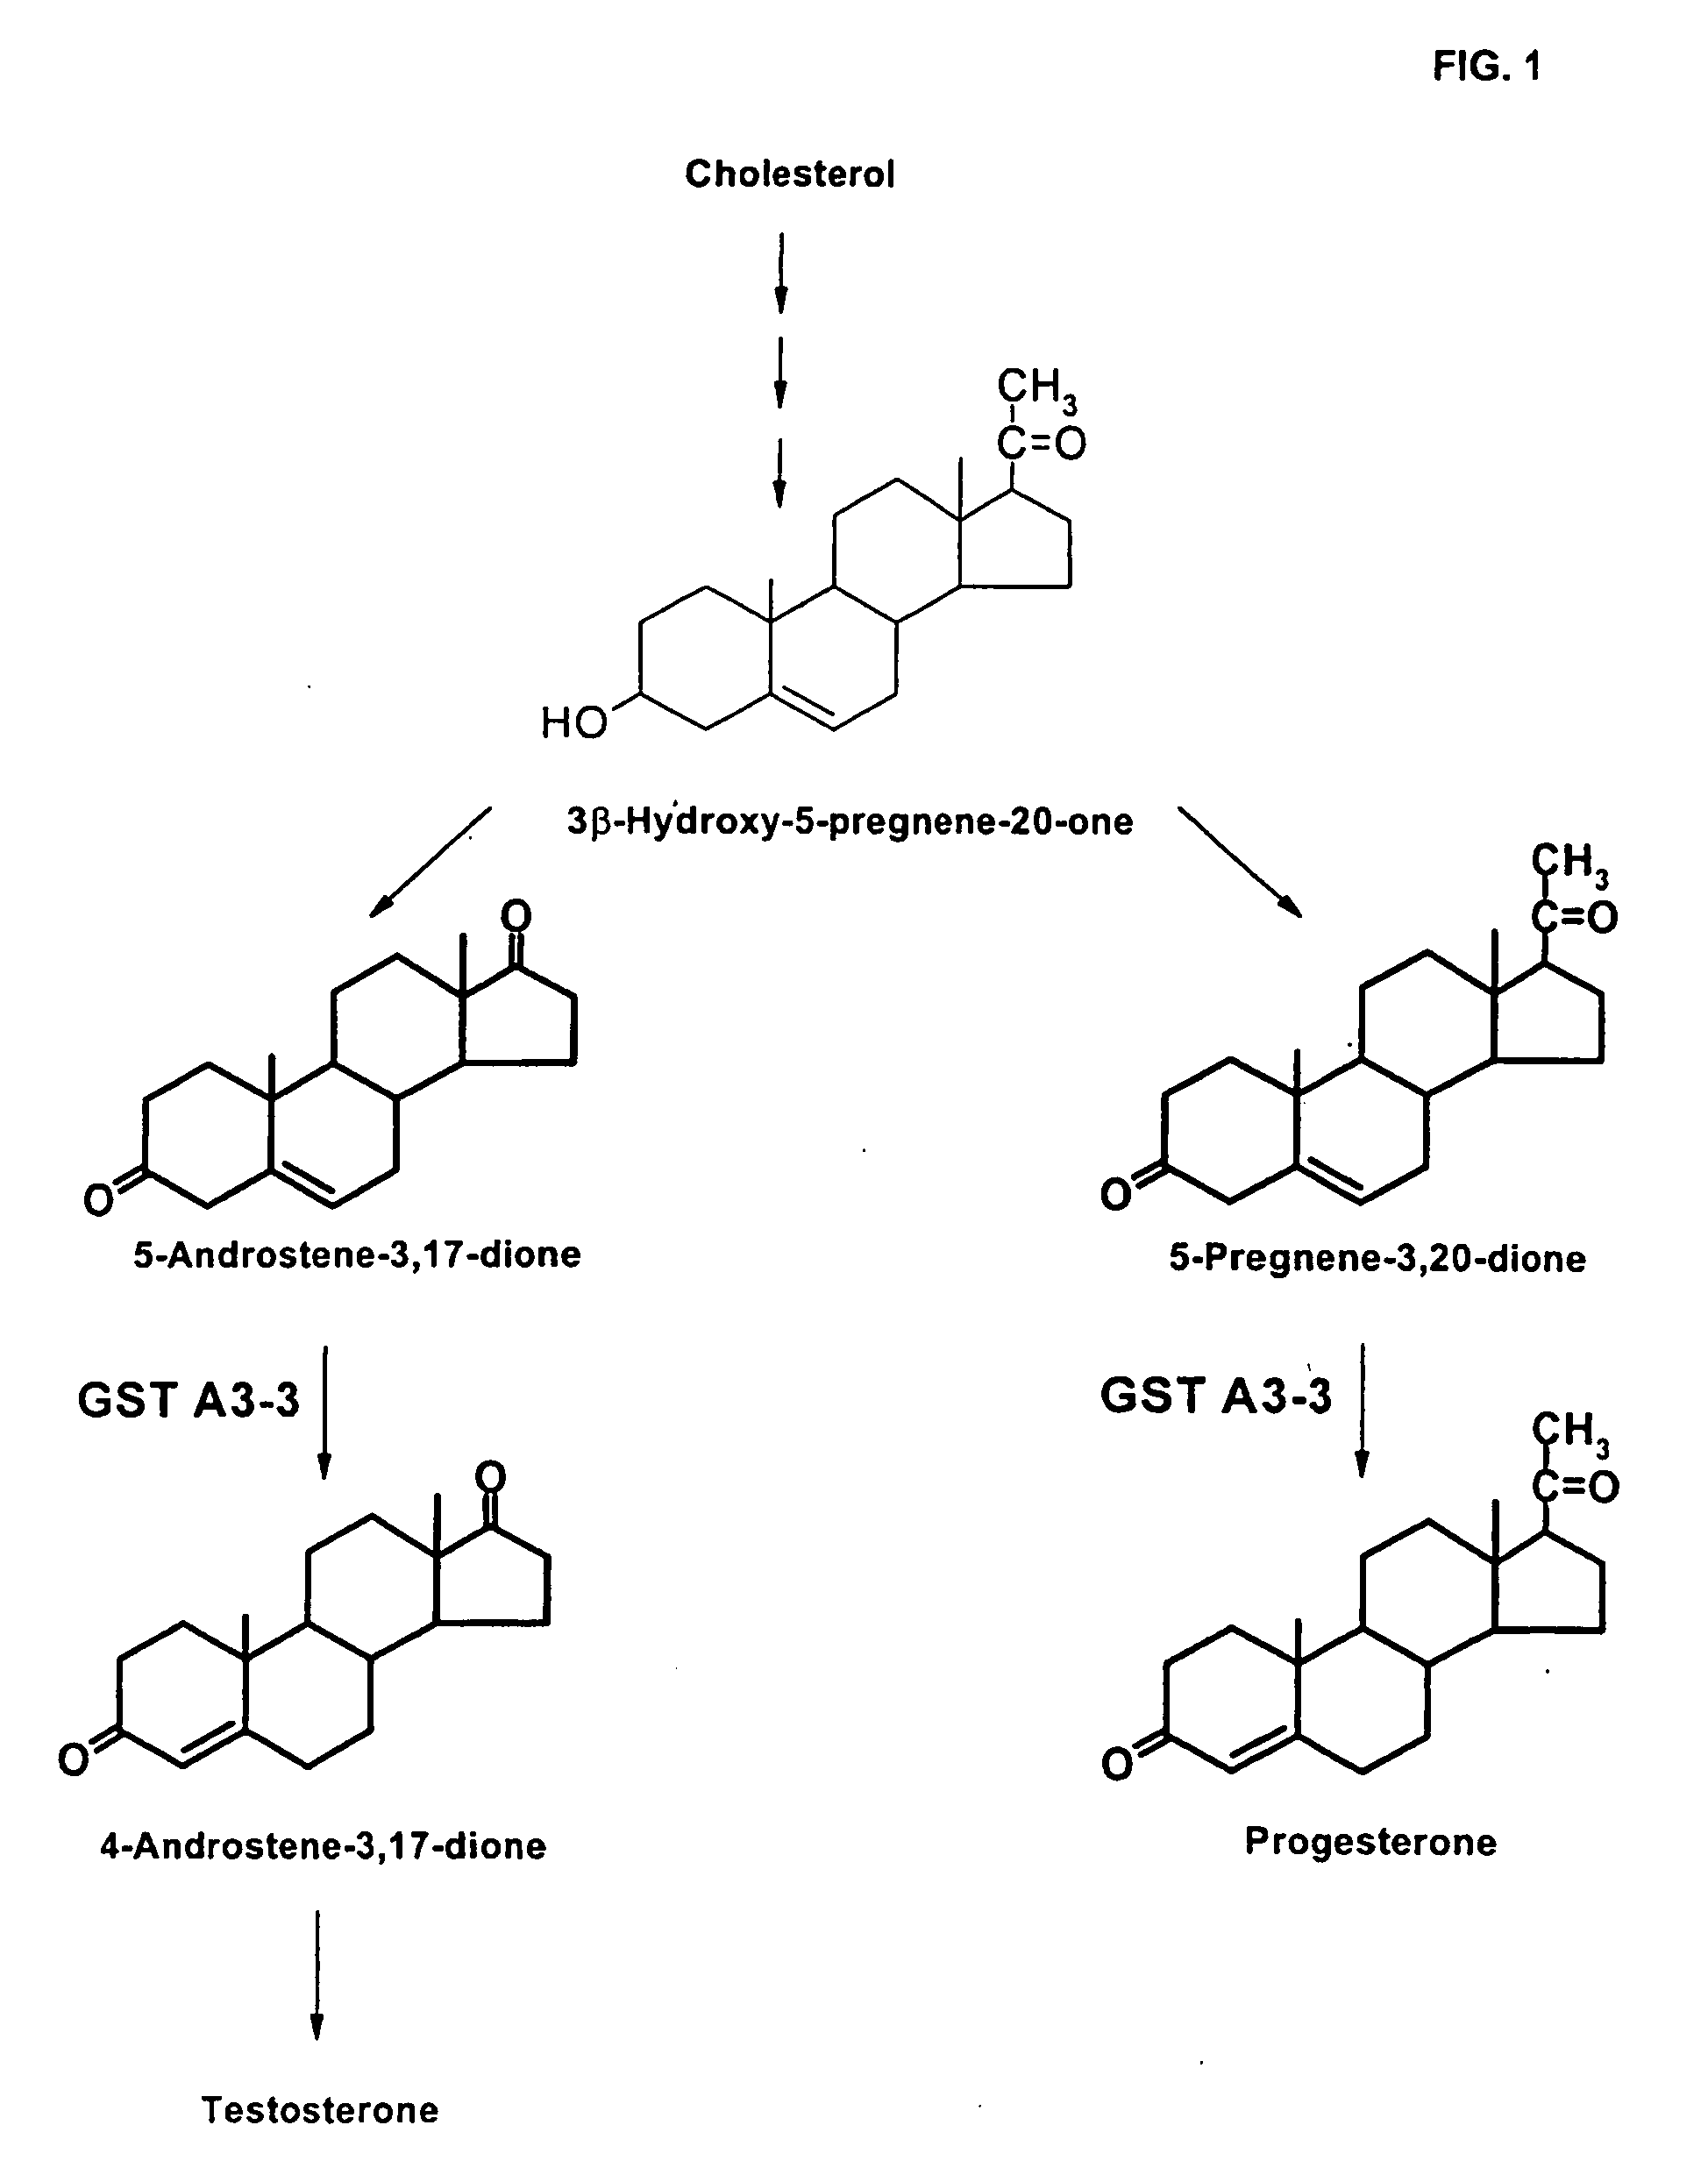 Inhibitors of gst a3-3 and gst a1-1 for the treatment of cancer